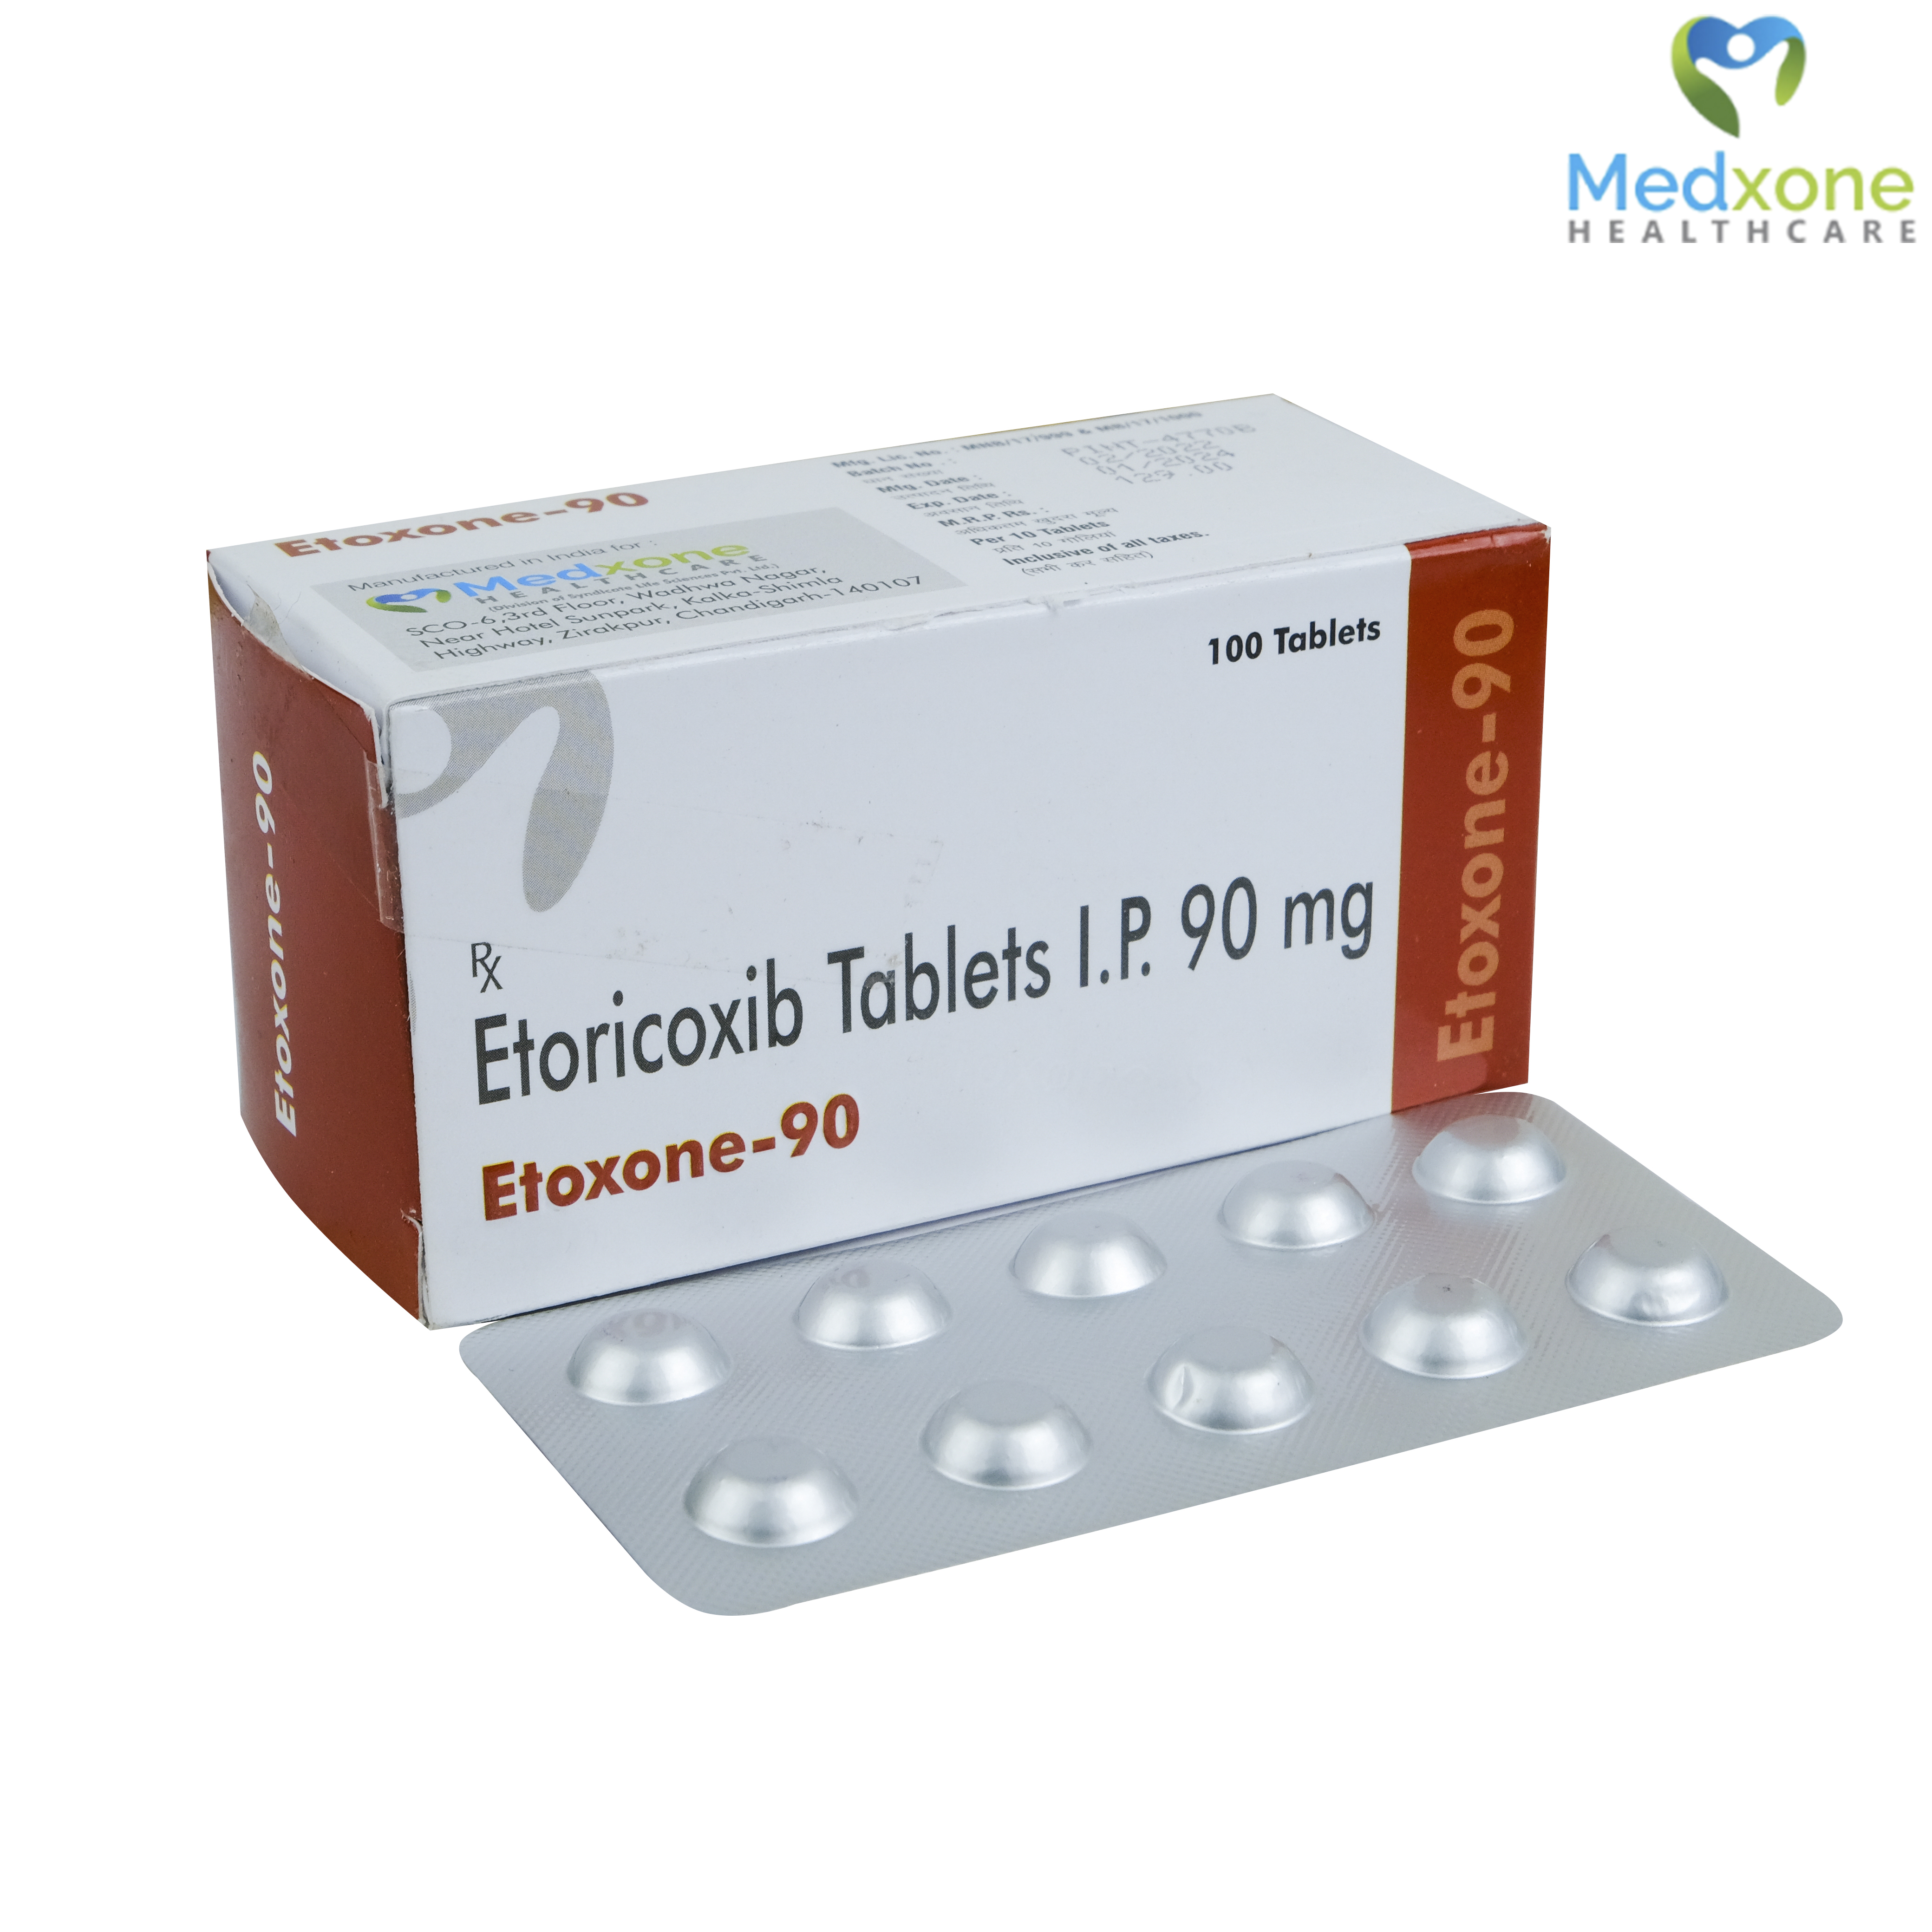 "Each Film coated Tablet Contains: Etoricoxib  90mg"